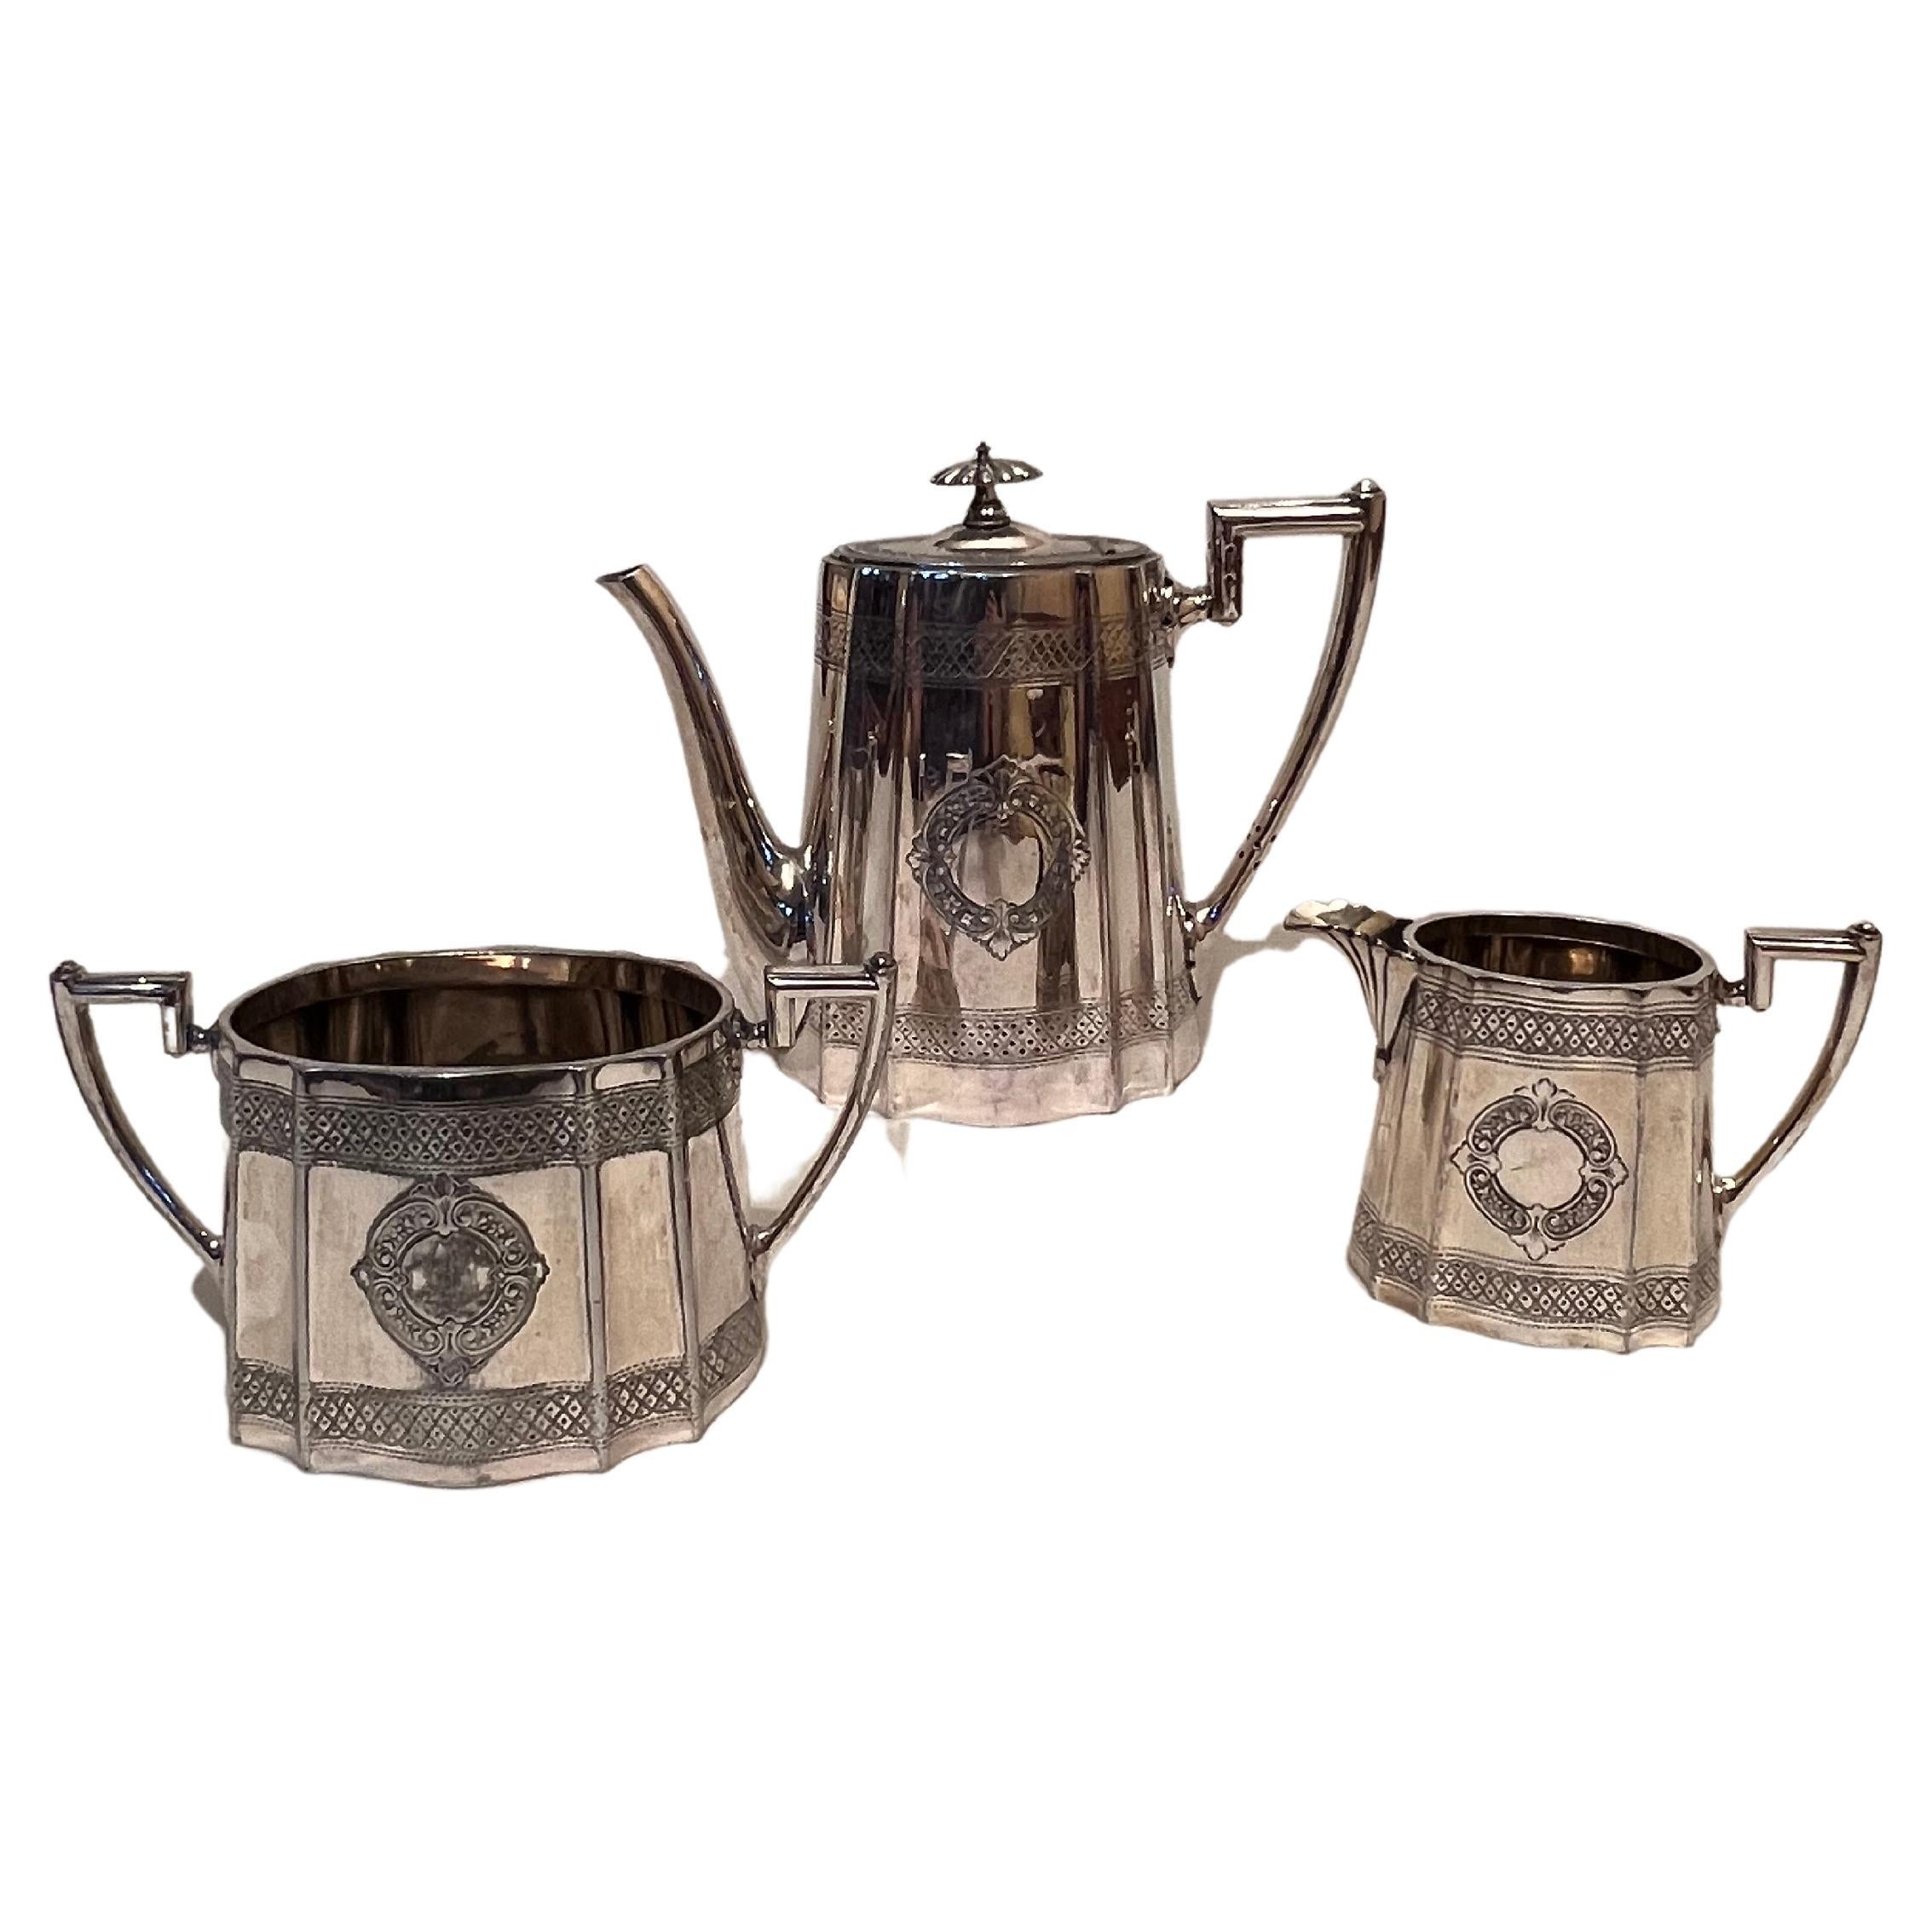 Sheffield triptych consisting of 'Walker & Hall' teapot, sugar bowl and milk jug For Sale